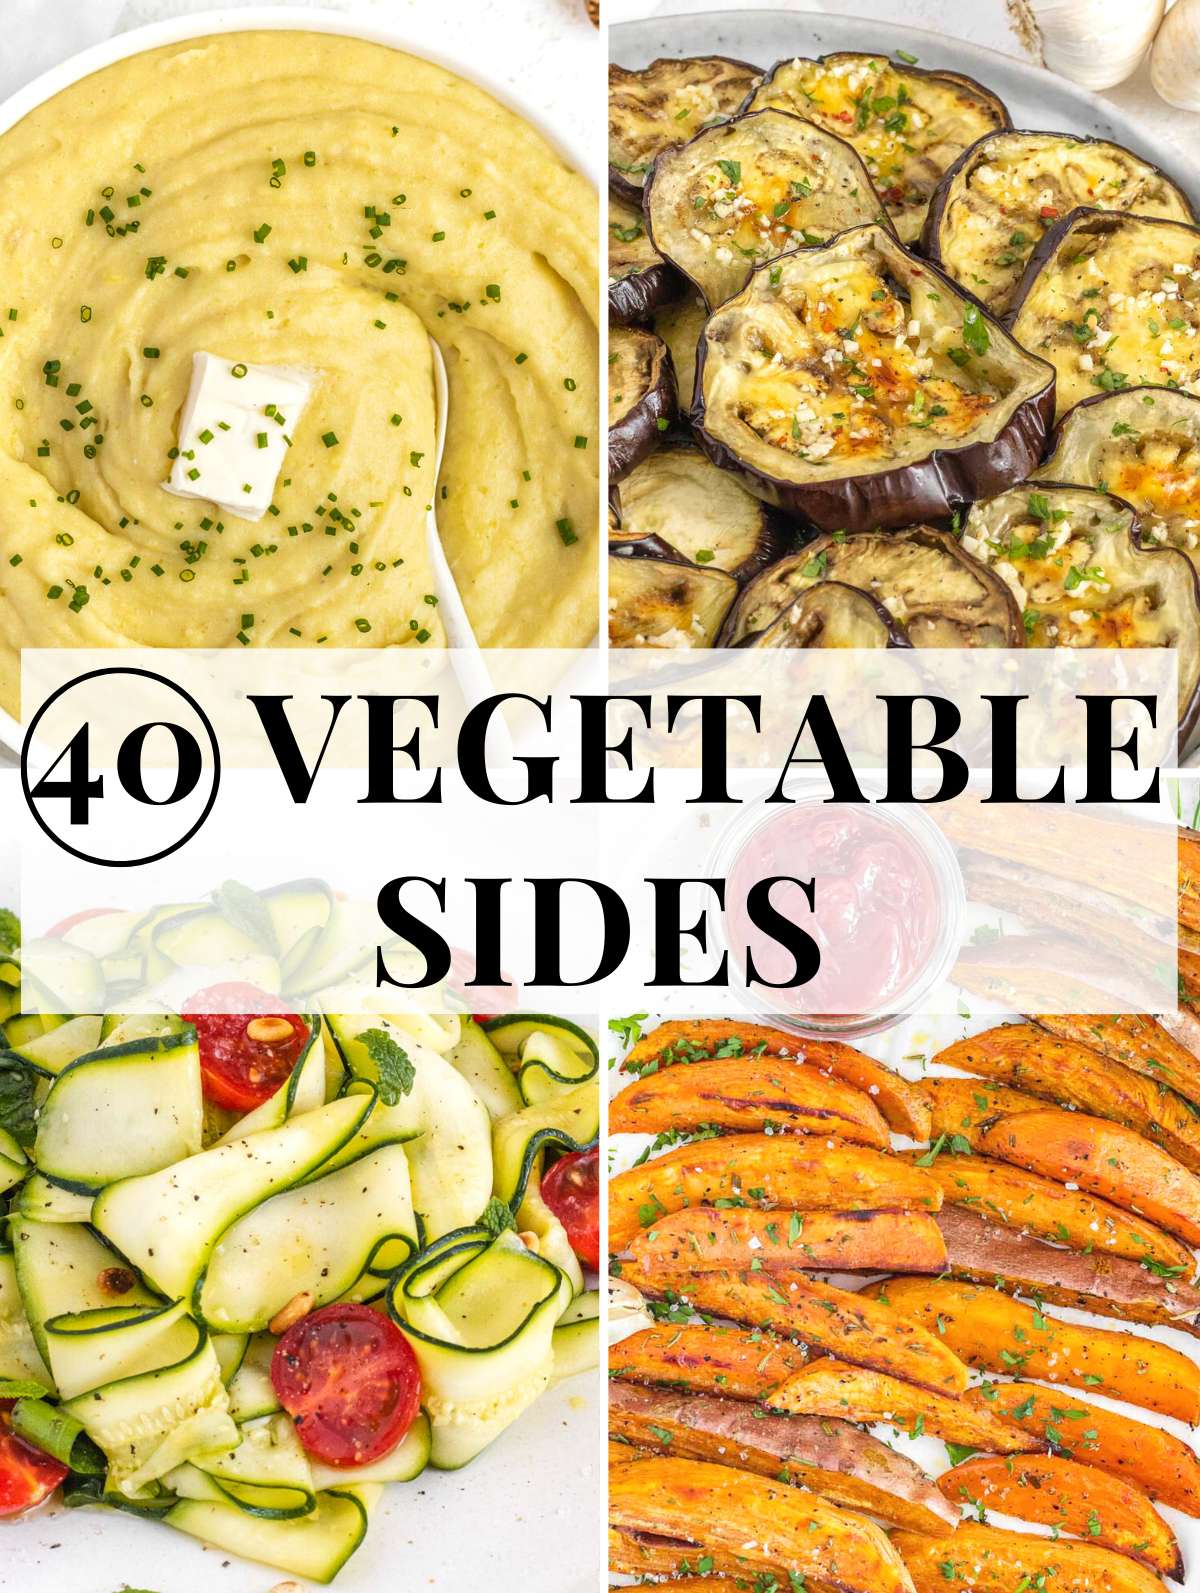 Vegetable sides with roasted and mashed vegetables